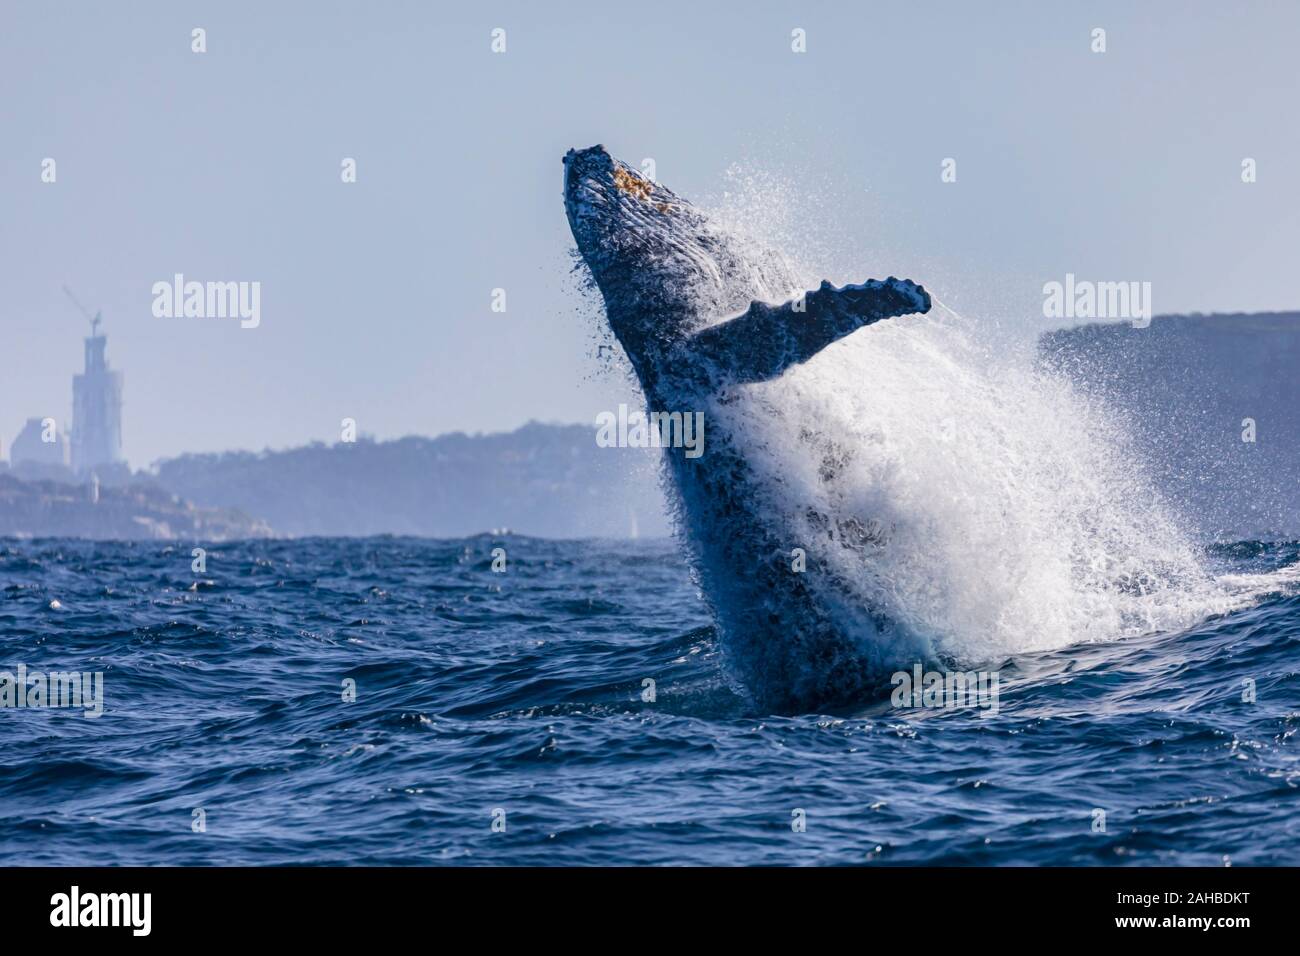 Humpback whale breaching off Sydney's Heads with Crows Nests in the background, Sydney, Australia Stock Photo